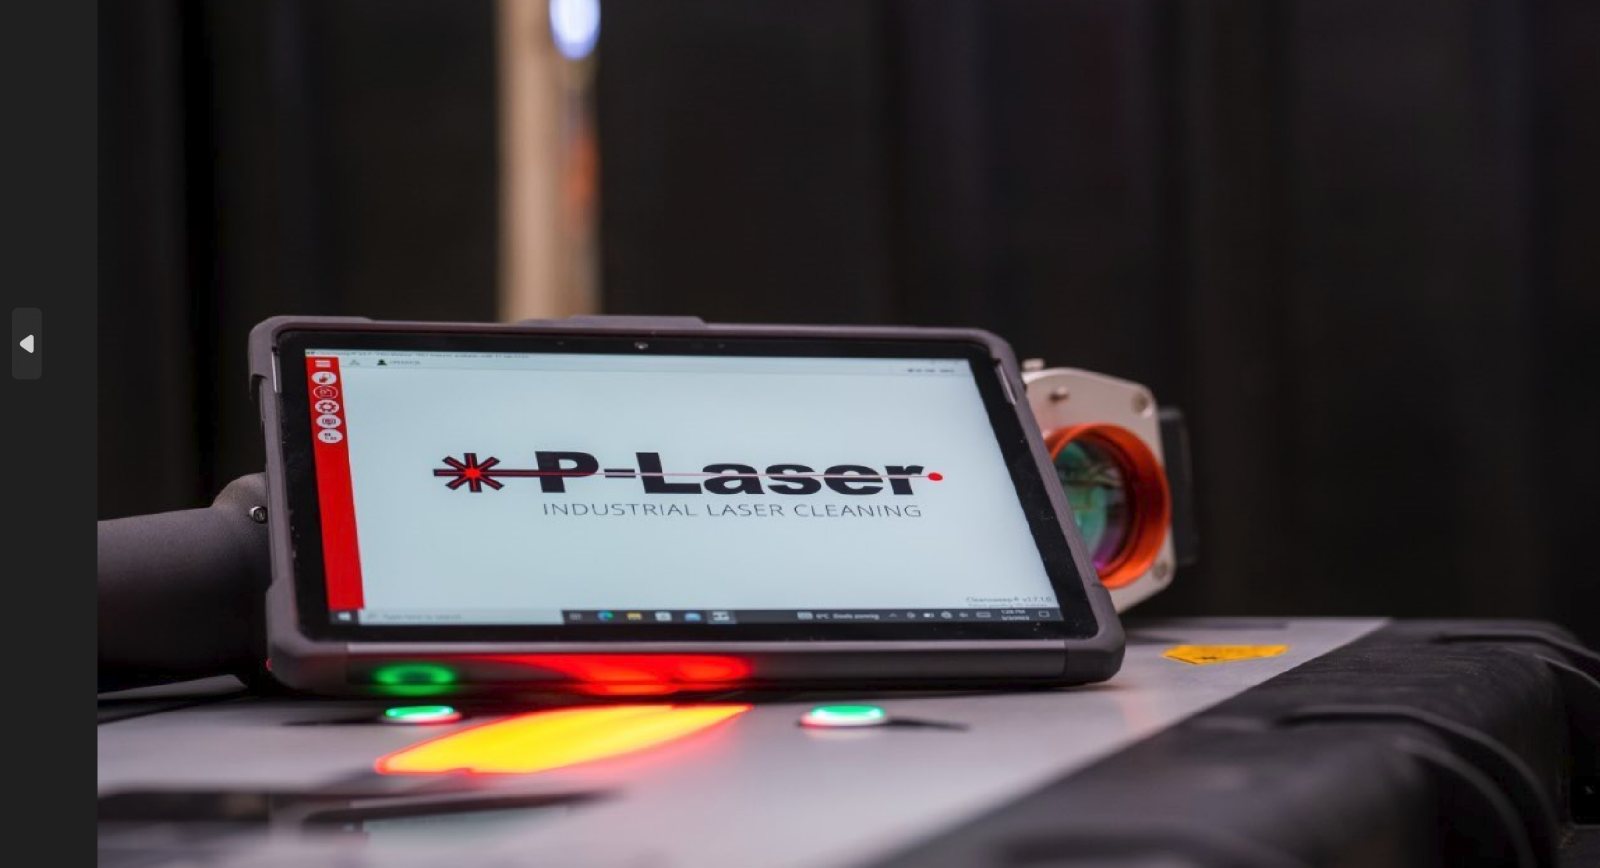 P-laser Industrial laser cleaning